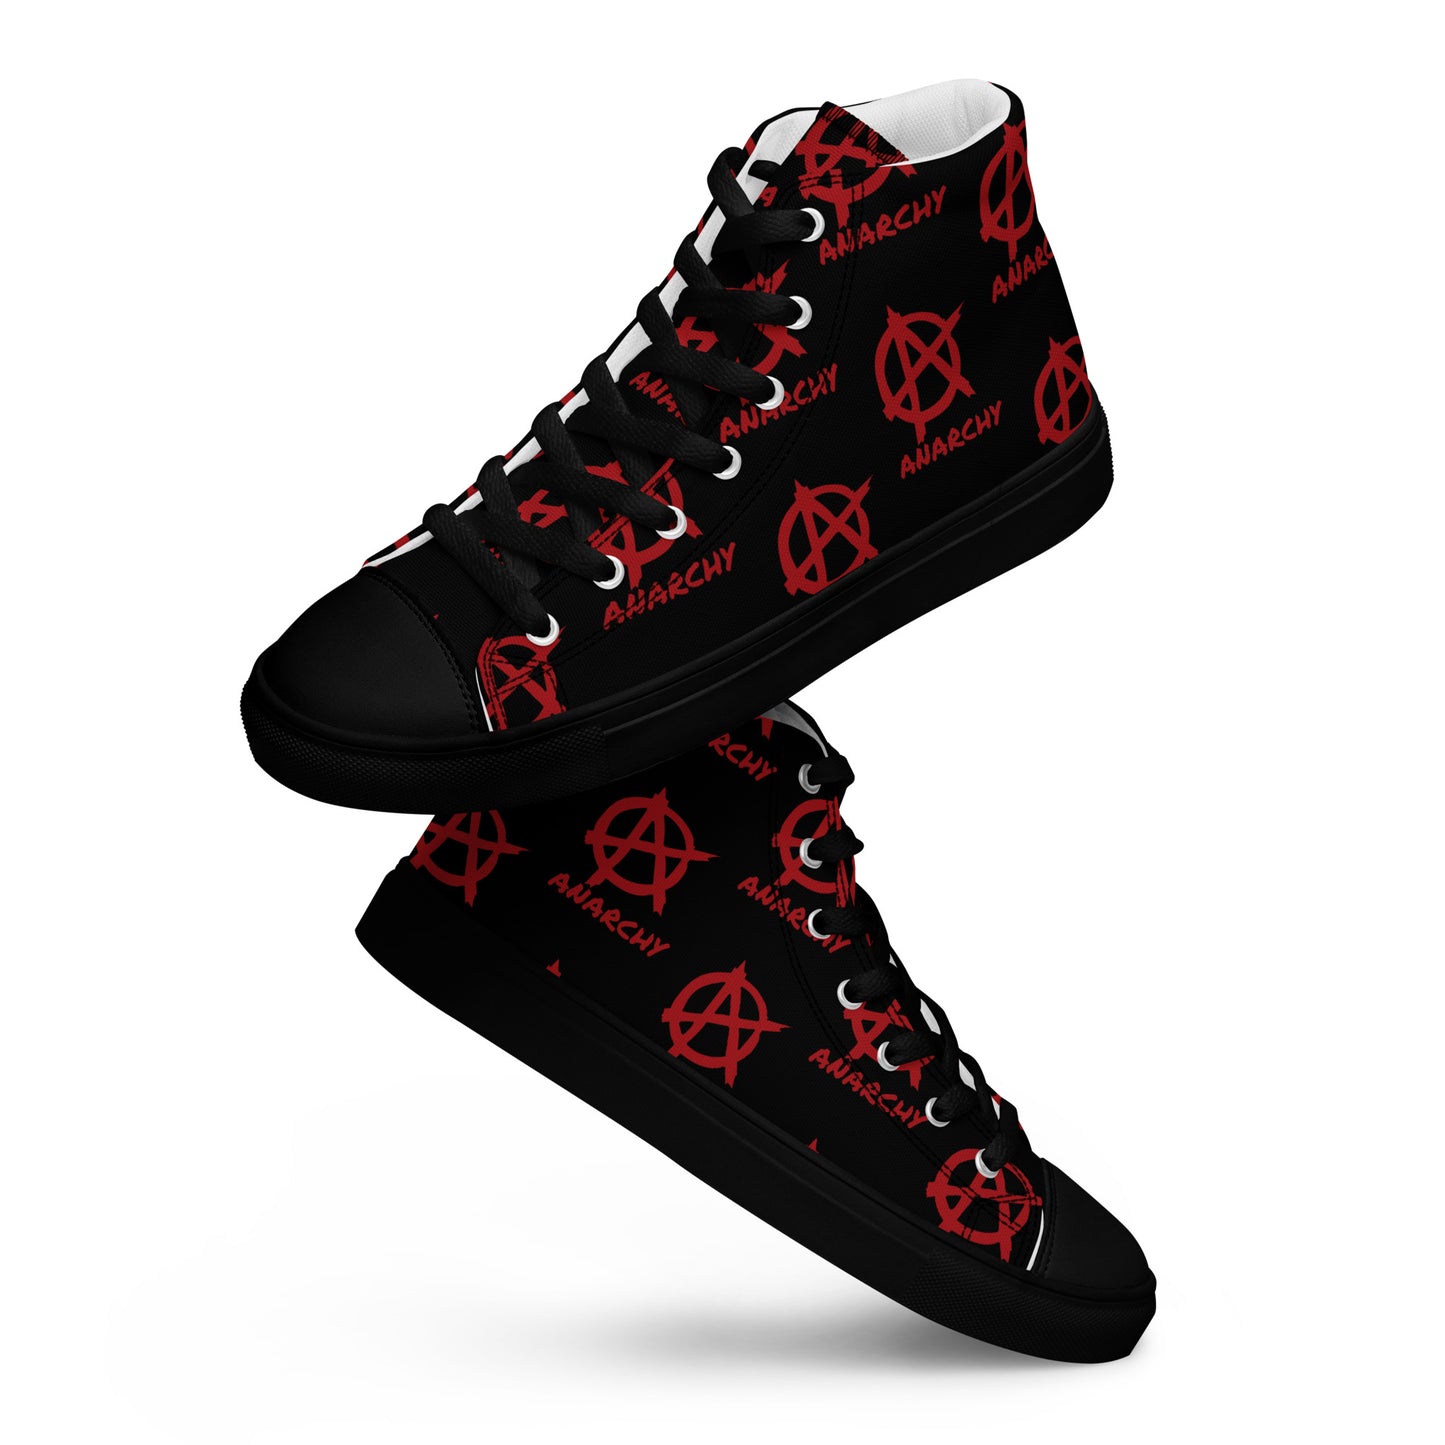 WOMEN'S ANARCHY HIGH TOP CANVAS SHOES